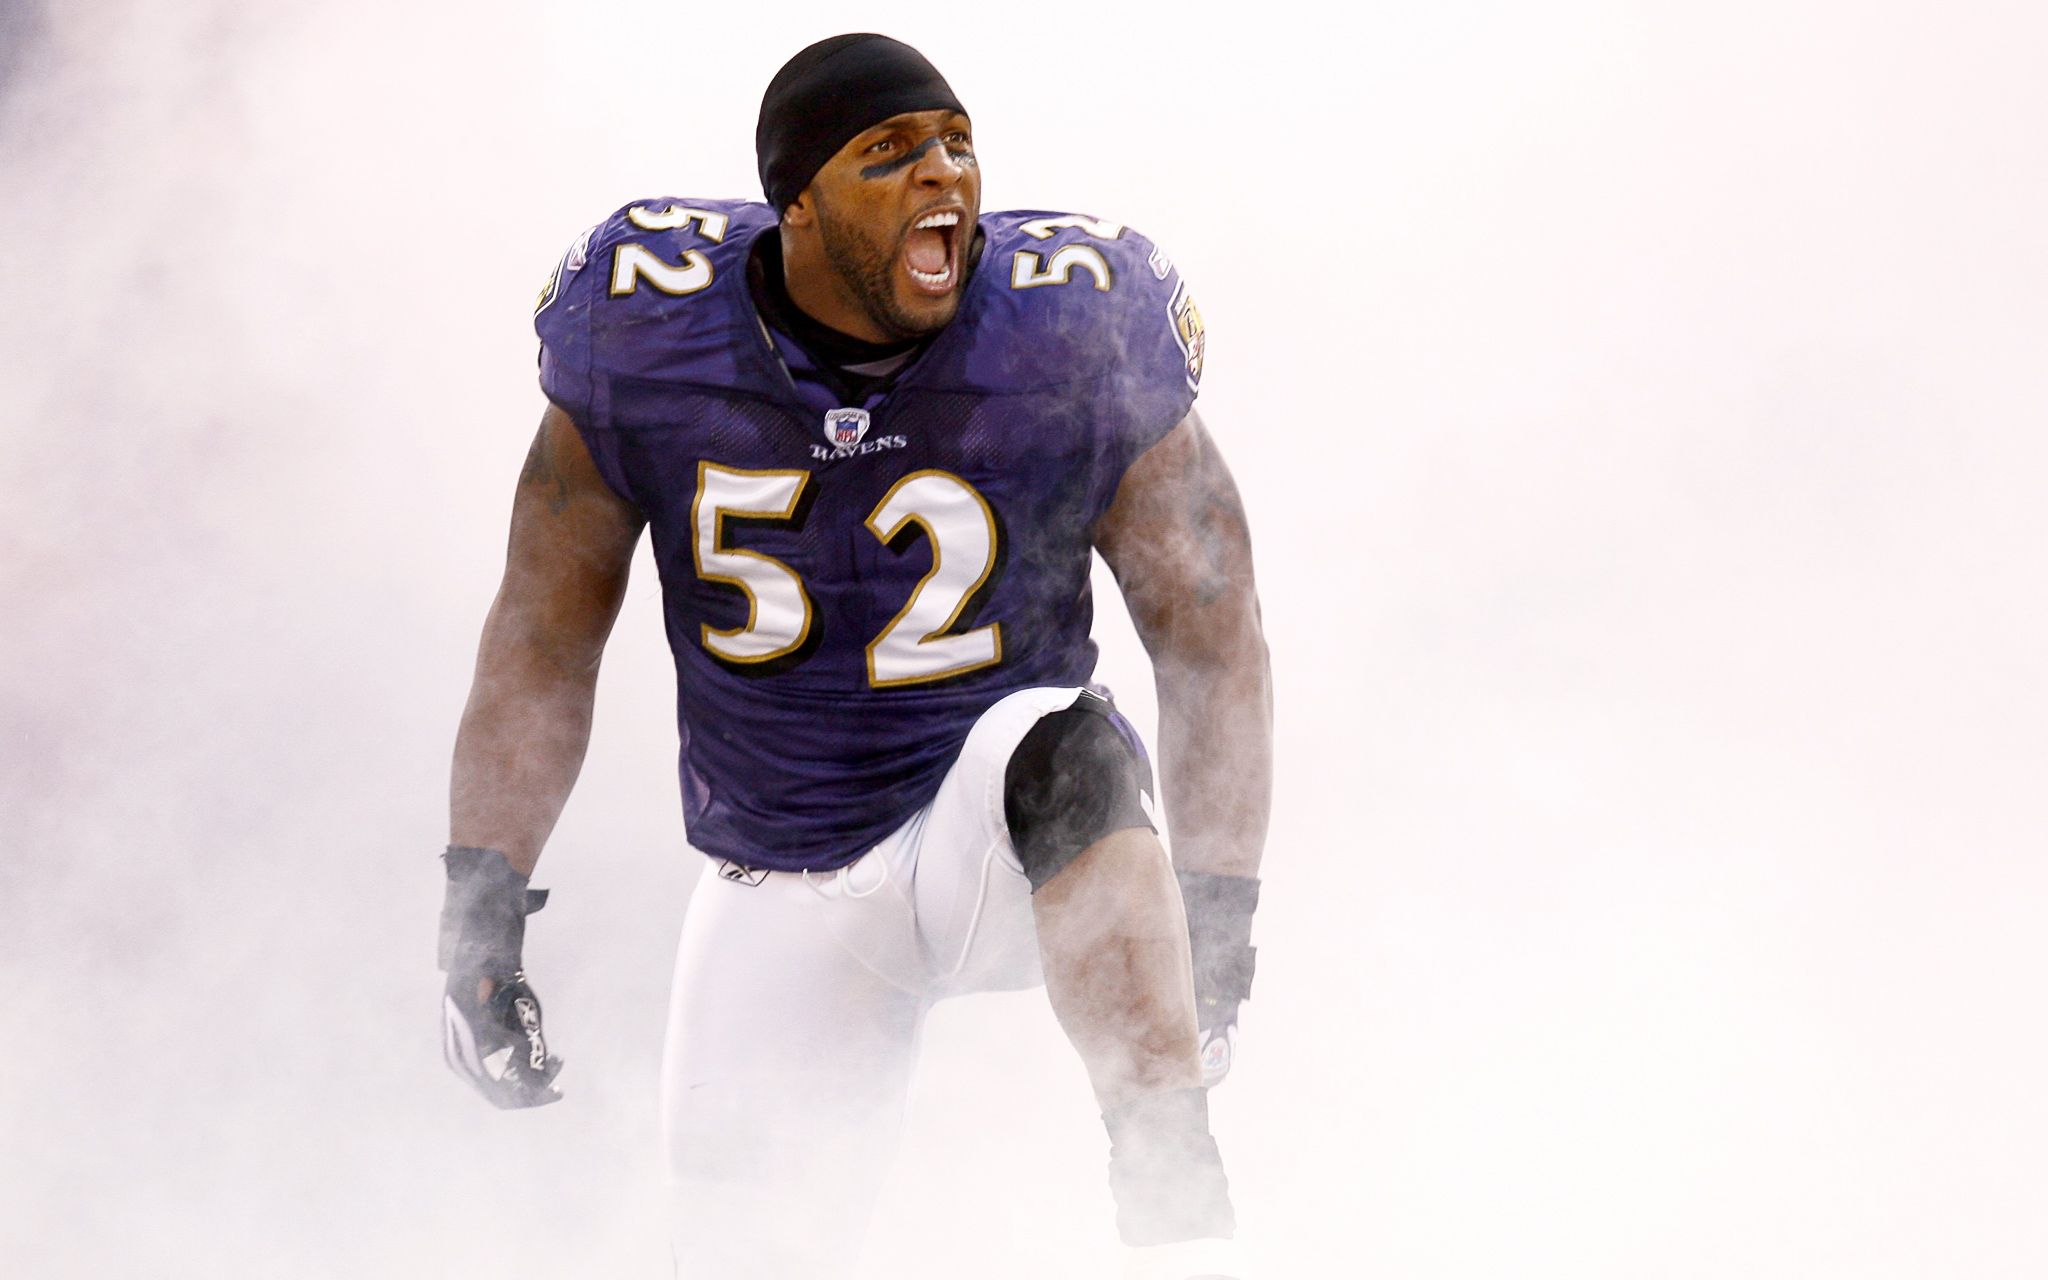 Ray Lewis Wallpapers.